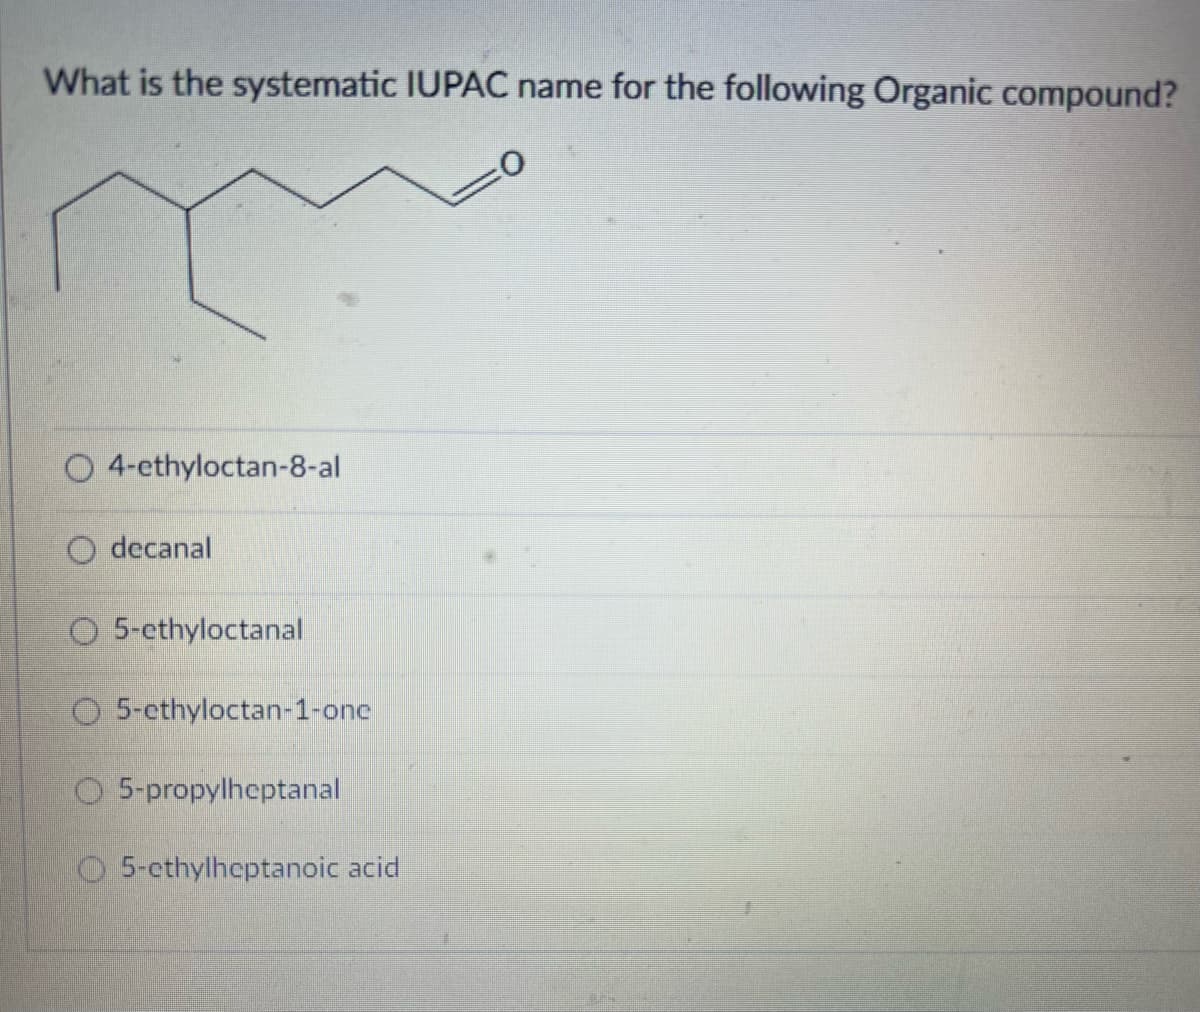 What is the systematic IUPAC name for the following Organic compound?
O 4-ethyloctan-8-al
decanal
O5-ethyloctanal
O5-ethyloctan-1-one
5-propylheptanal
5-cthylheptanoic acid